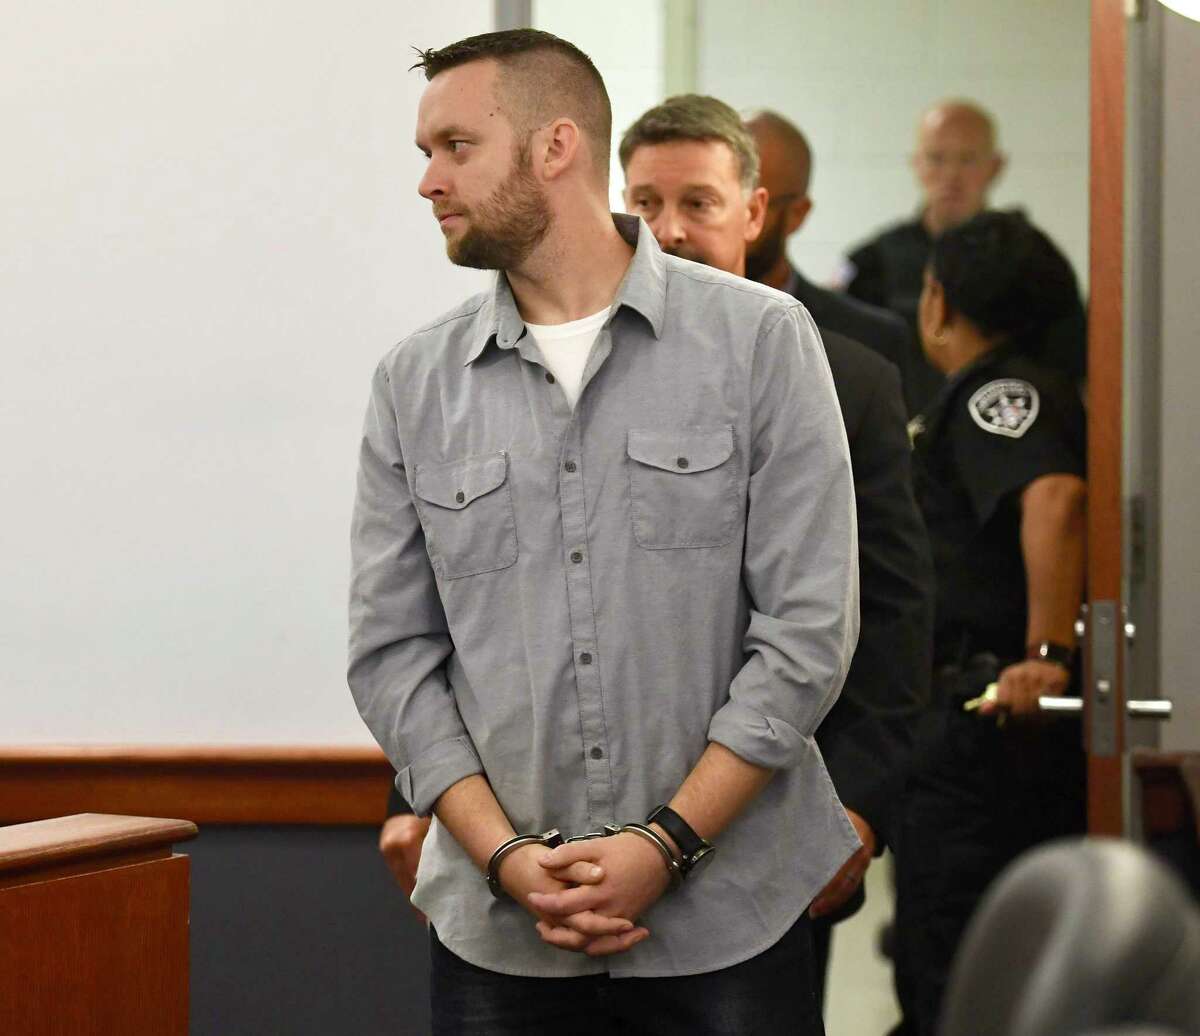 Troy code enforcement officer James Lance is arraigned in Troy City Court on Thursday morning, Sept. 13, 2018, in Troy, N.Y. Two men are facing charges in connection with a state investigation of the sale of tax-delinquent properties to Troy employees, city officials confirmed Thursday. (Skip Dickstein/Times Union)